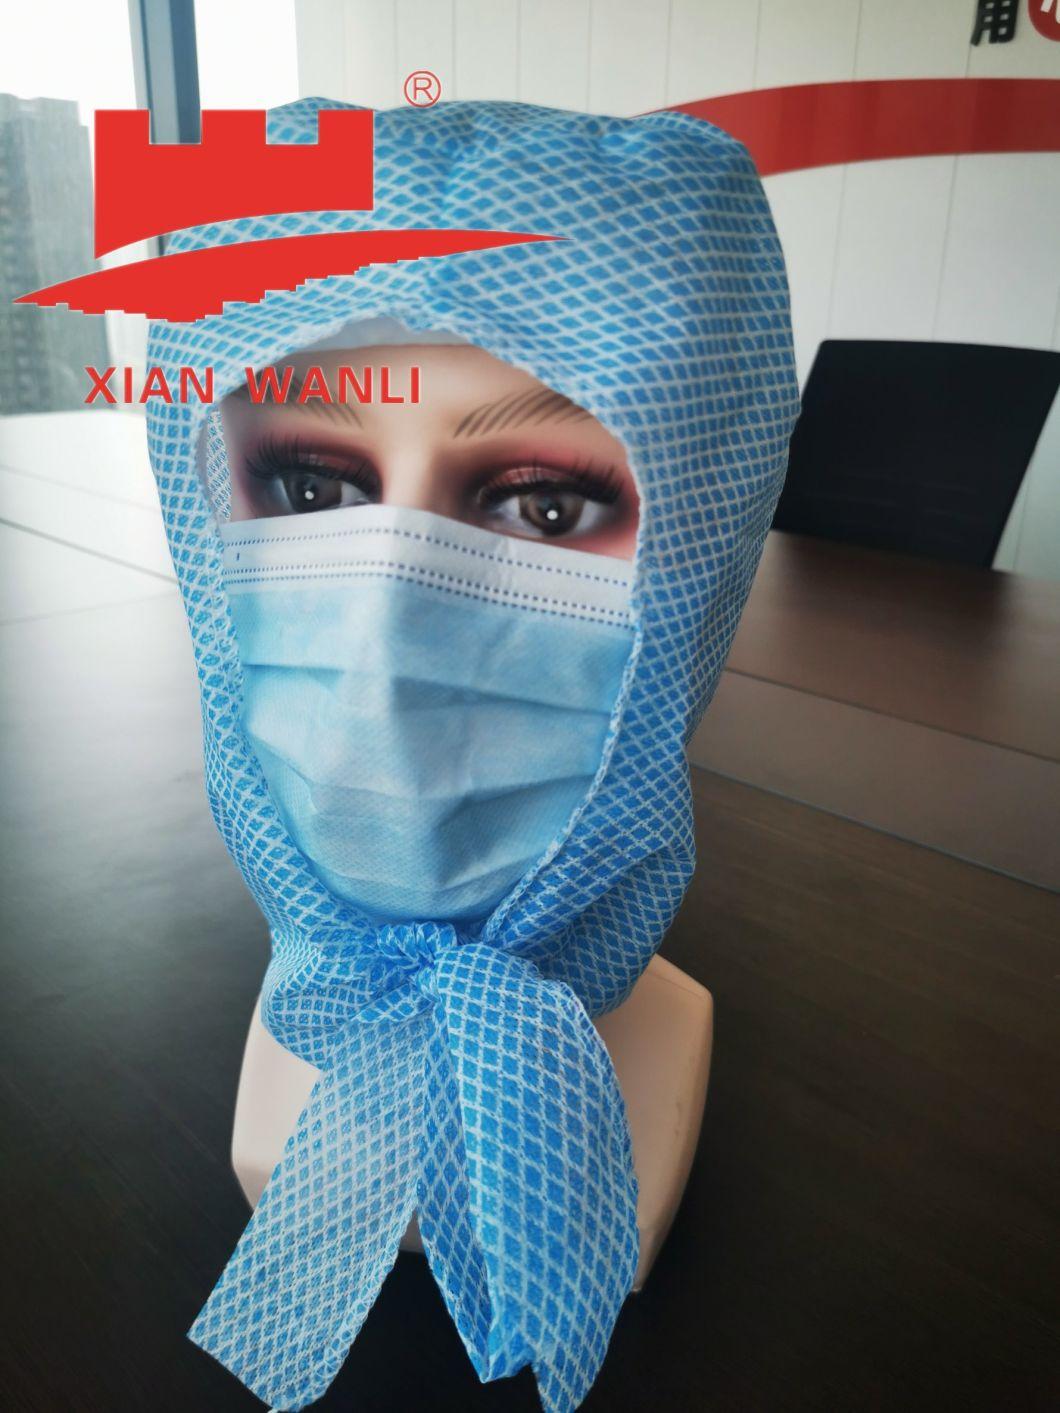 Nurse Cap for Hospital Nonwoven Spunlace Scrub Hats Surgical Cap with Ties